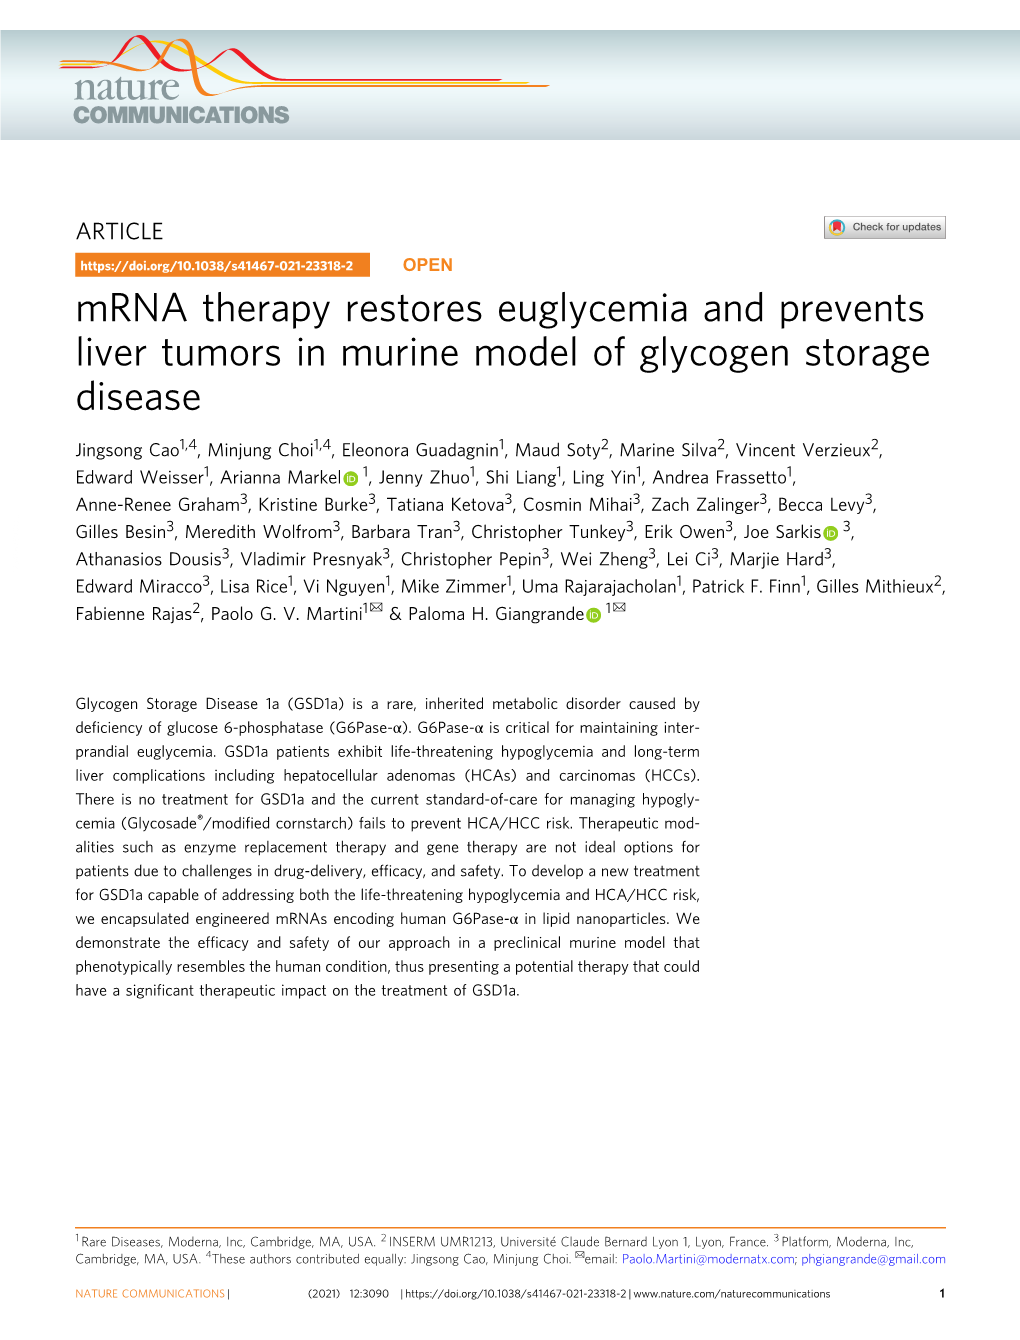 Mrna Therapy Restores Euglycemia and Prevents Liver Tumors in Murine Model of Glycogen Storage Disease